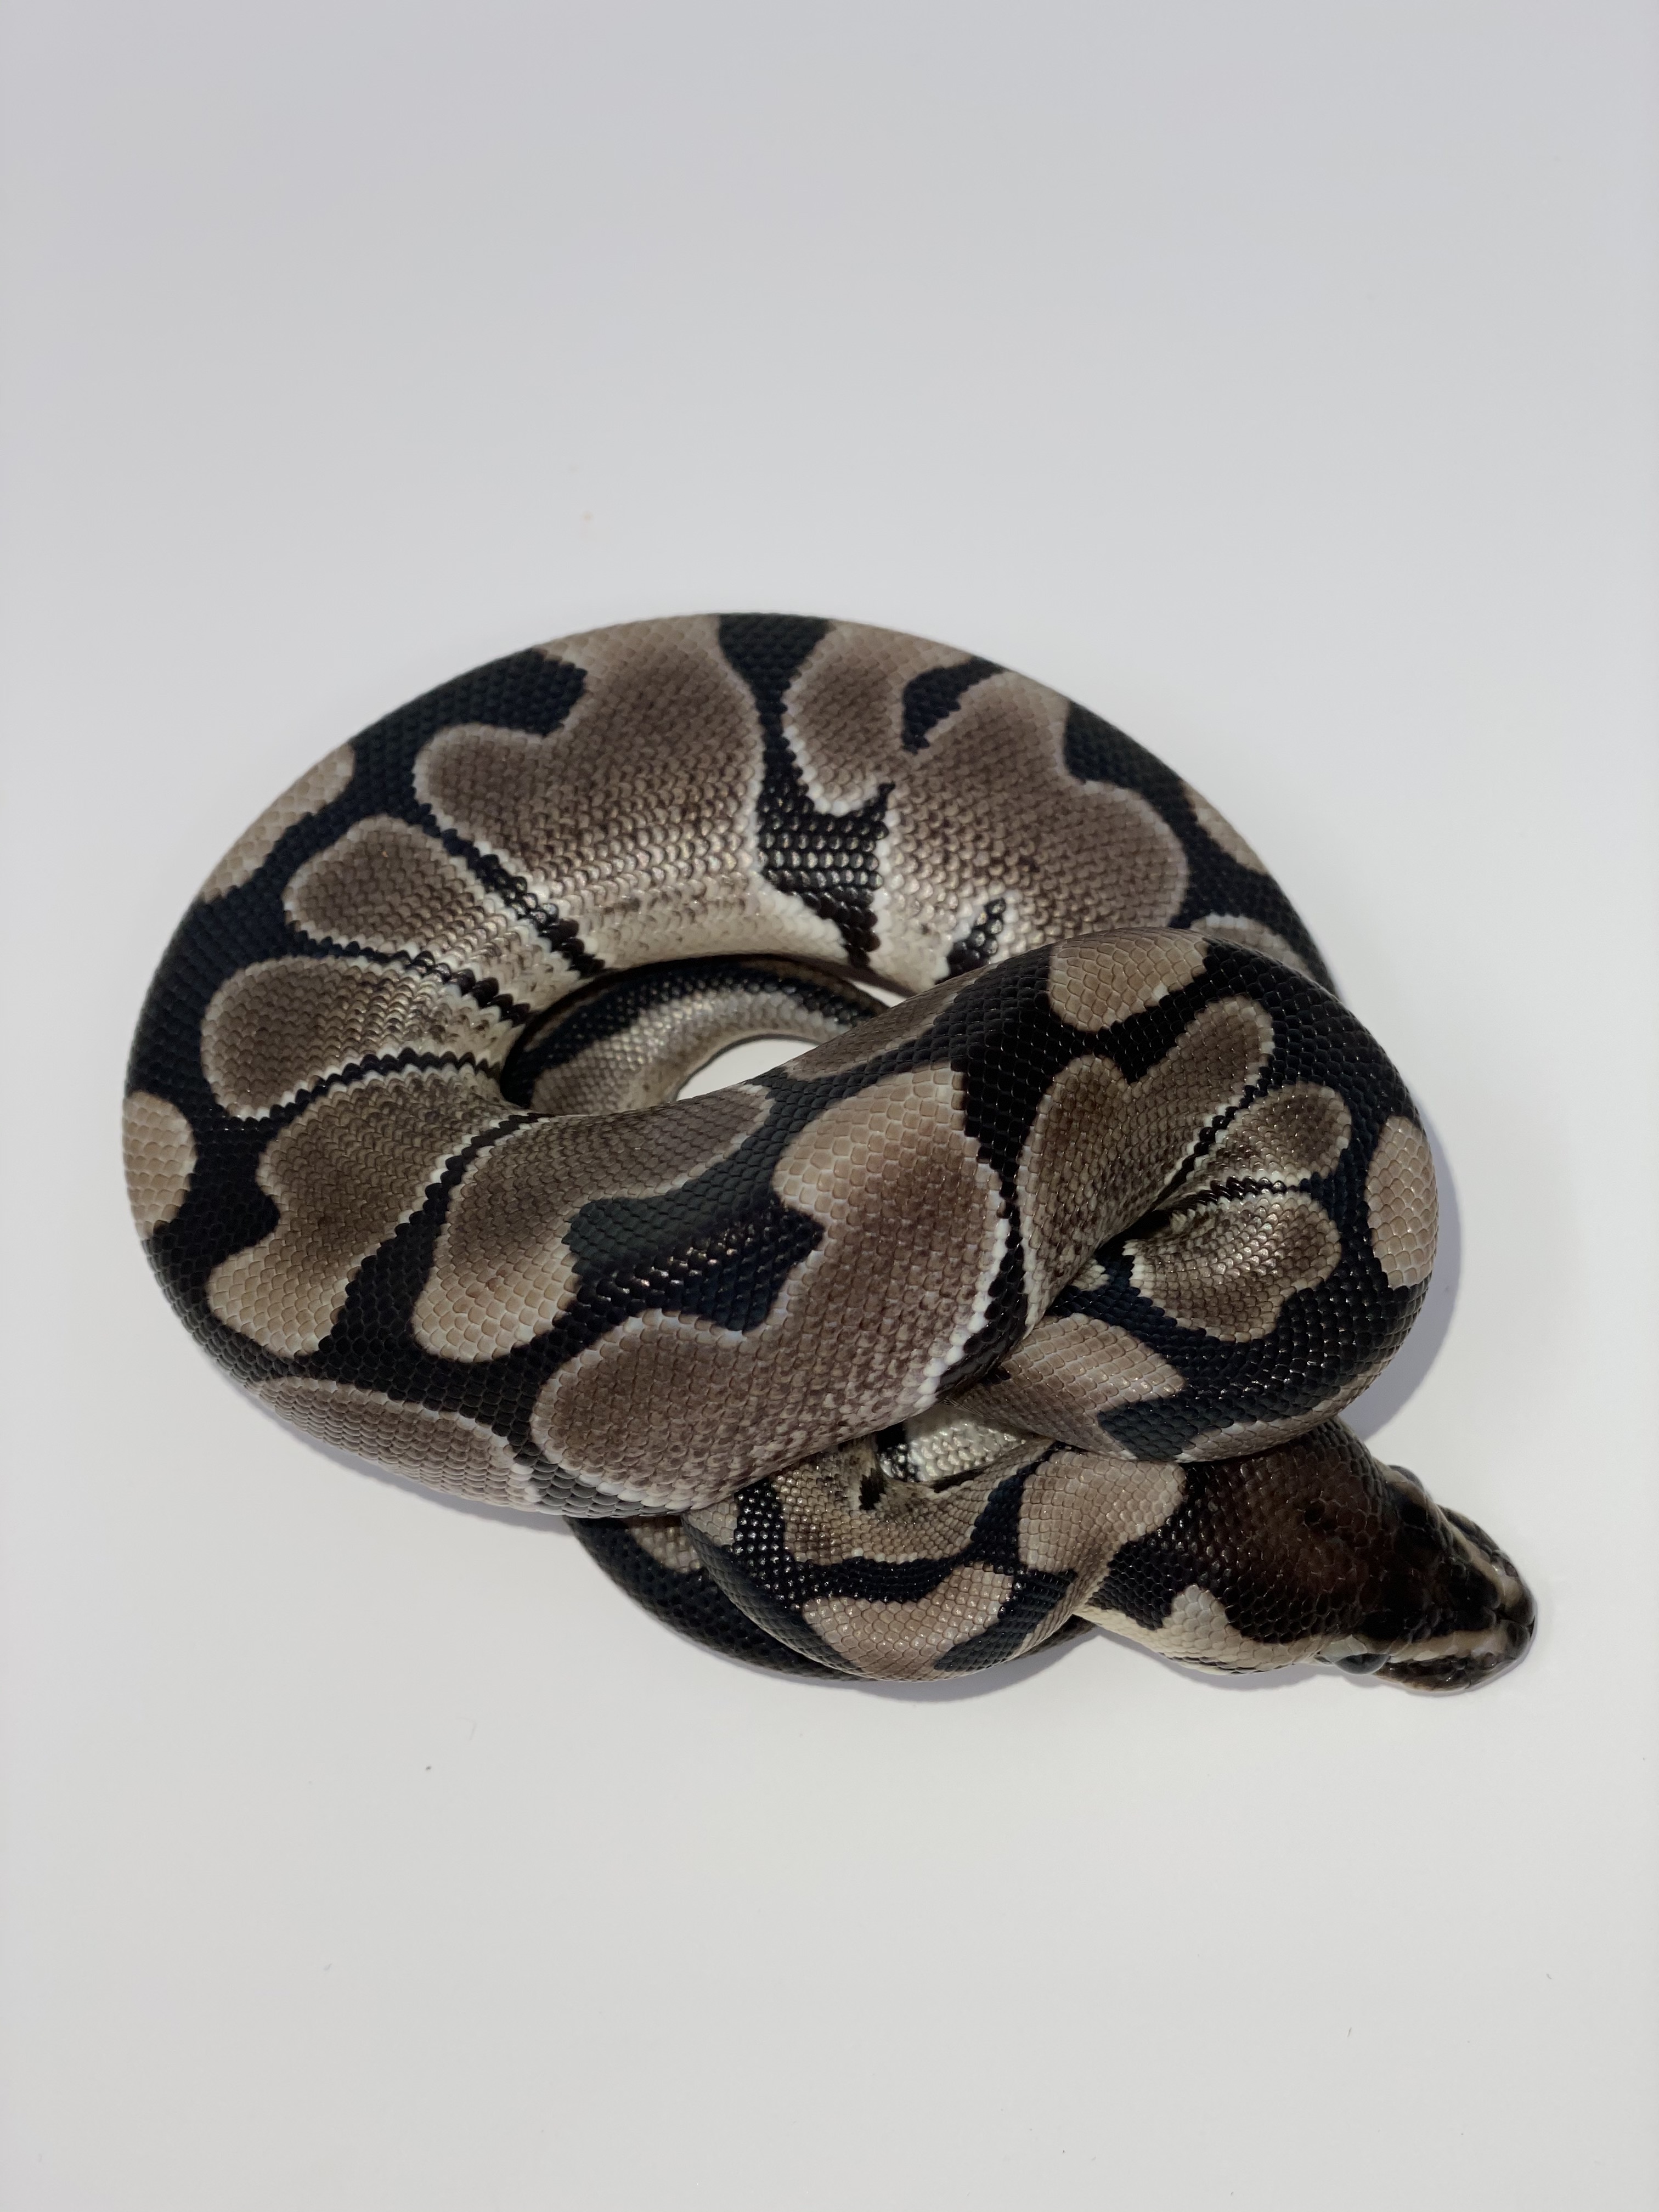 Jolliff Axanthic Ball Python by Red Clay Reptiles